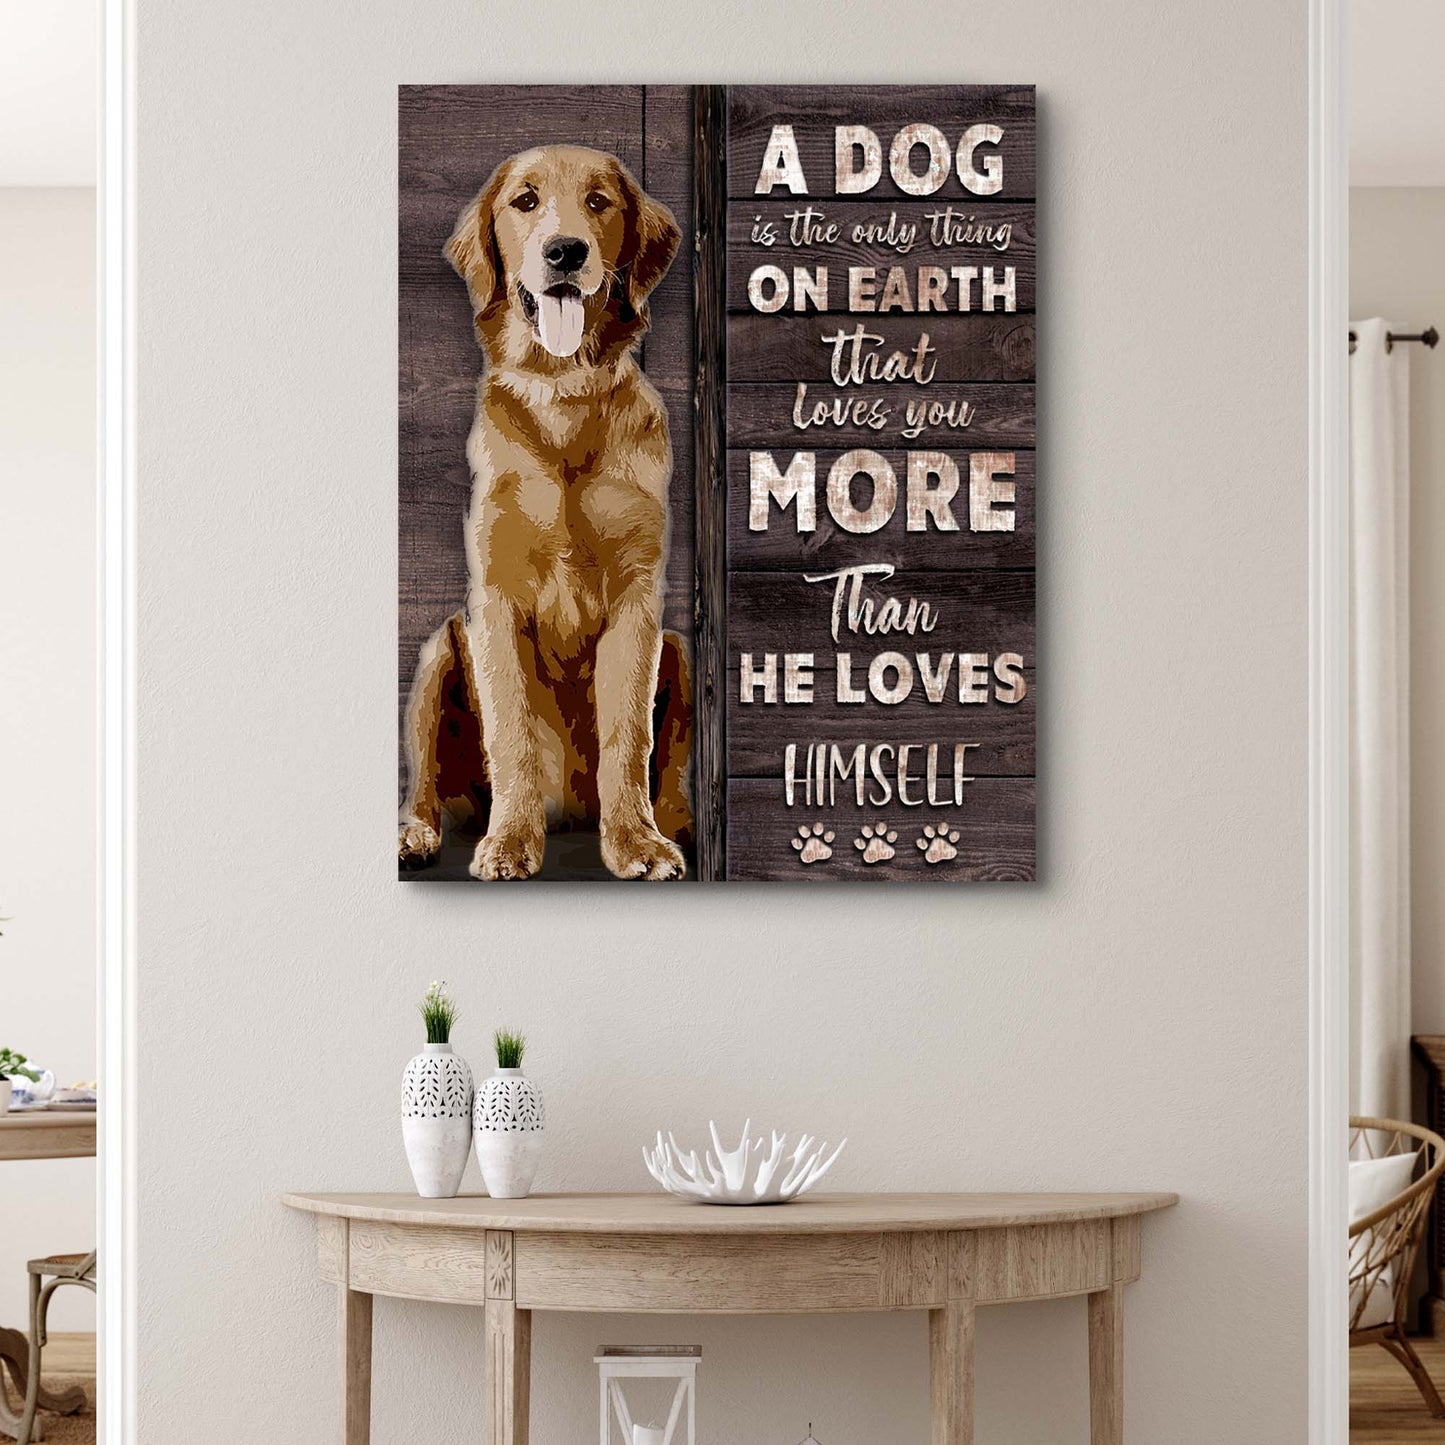 A Dog Loves You More Sign - Image by Tailored Canvases